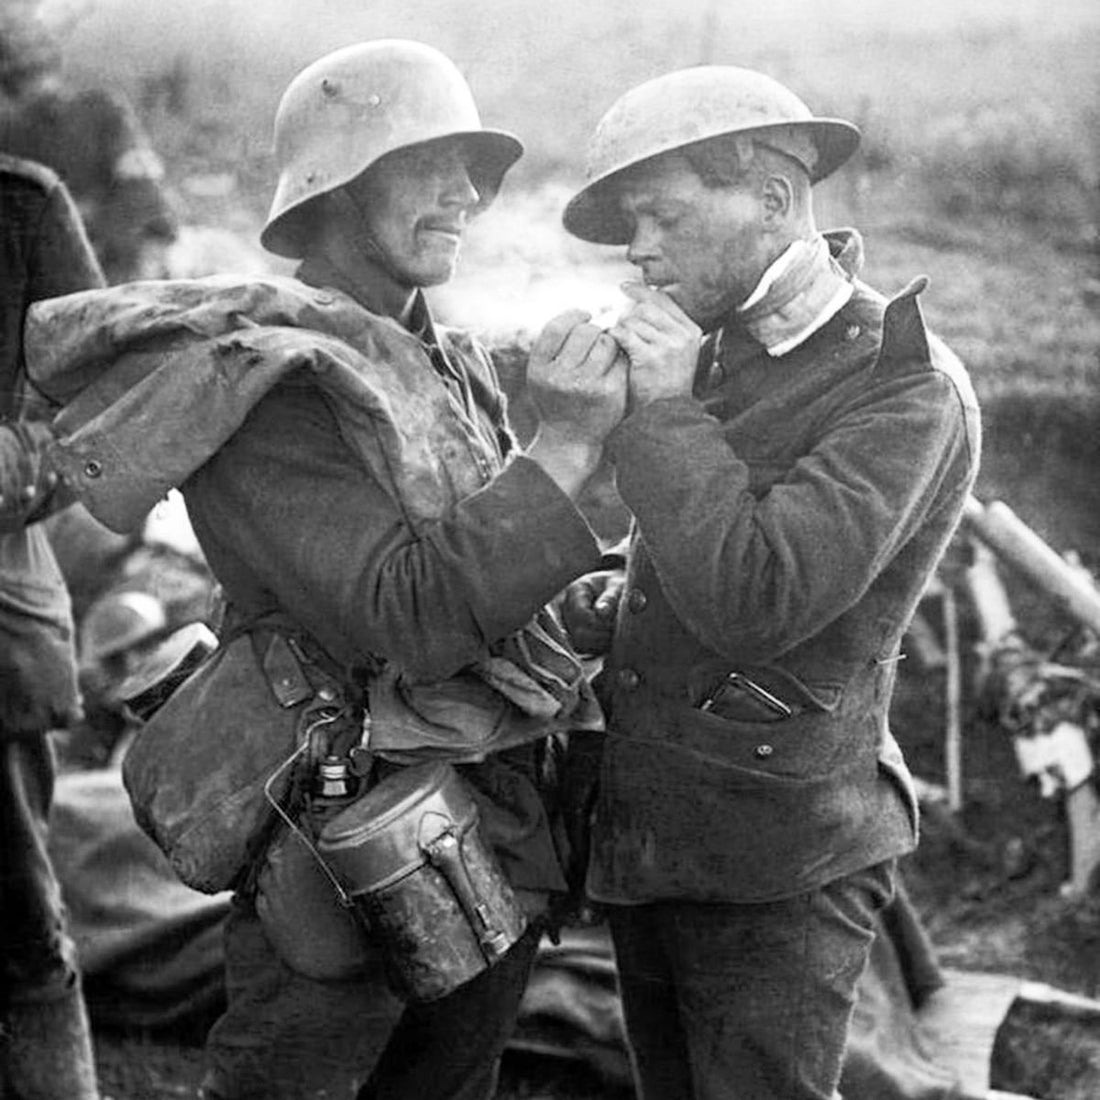 Tobacco and cigarettes in the First World War